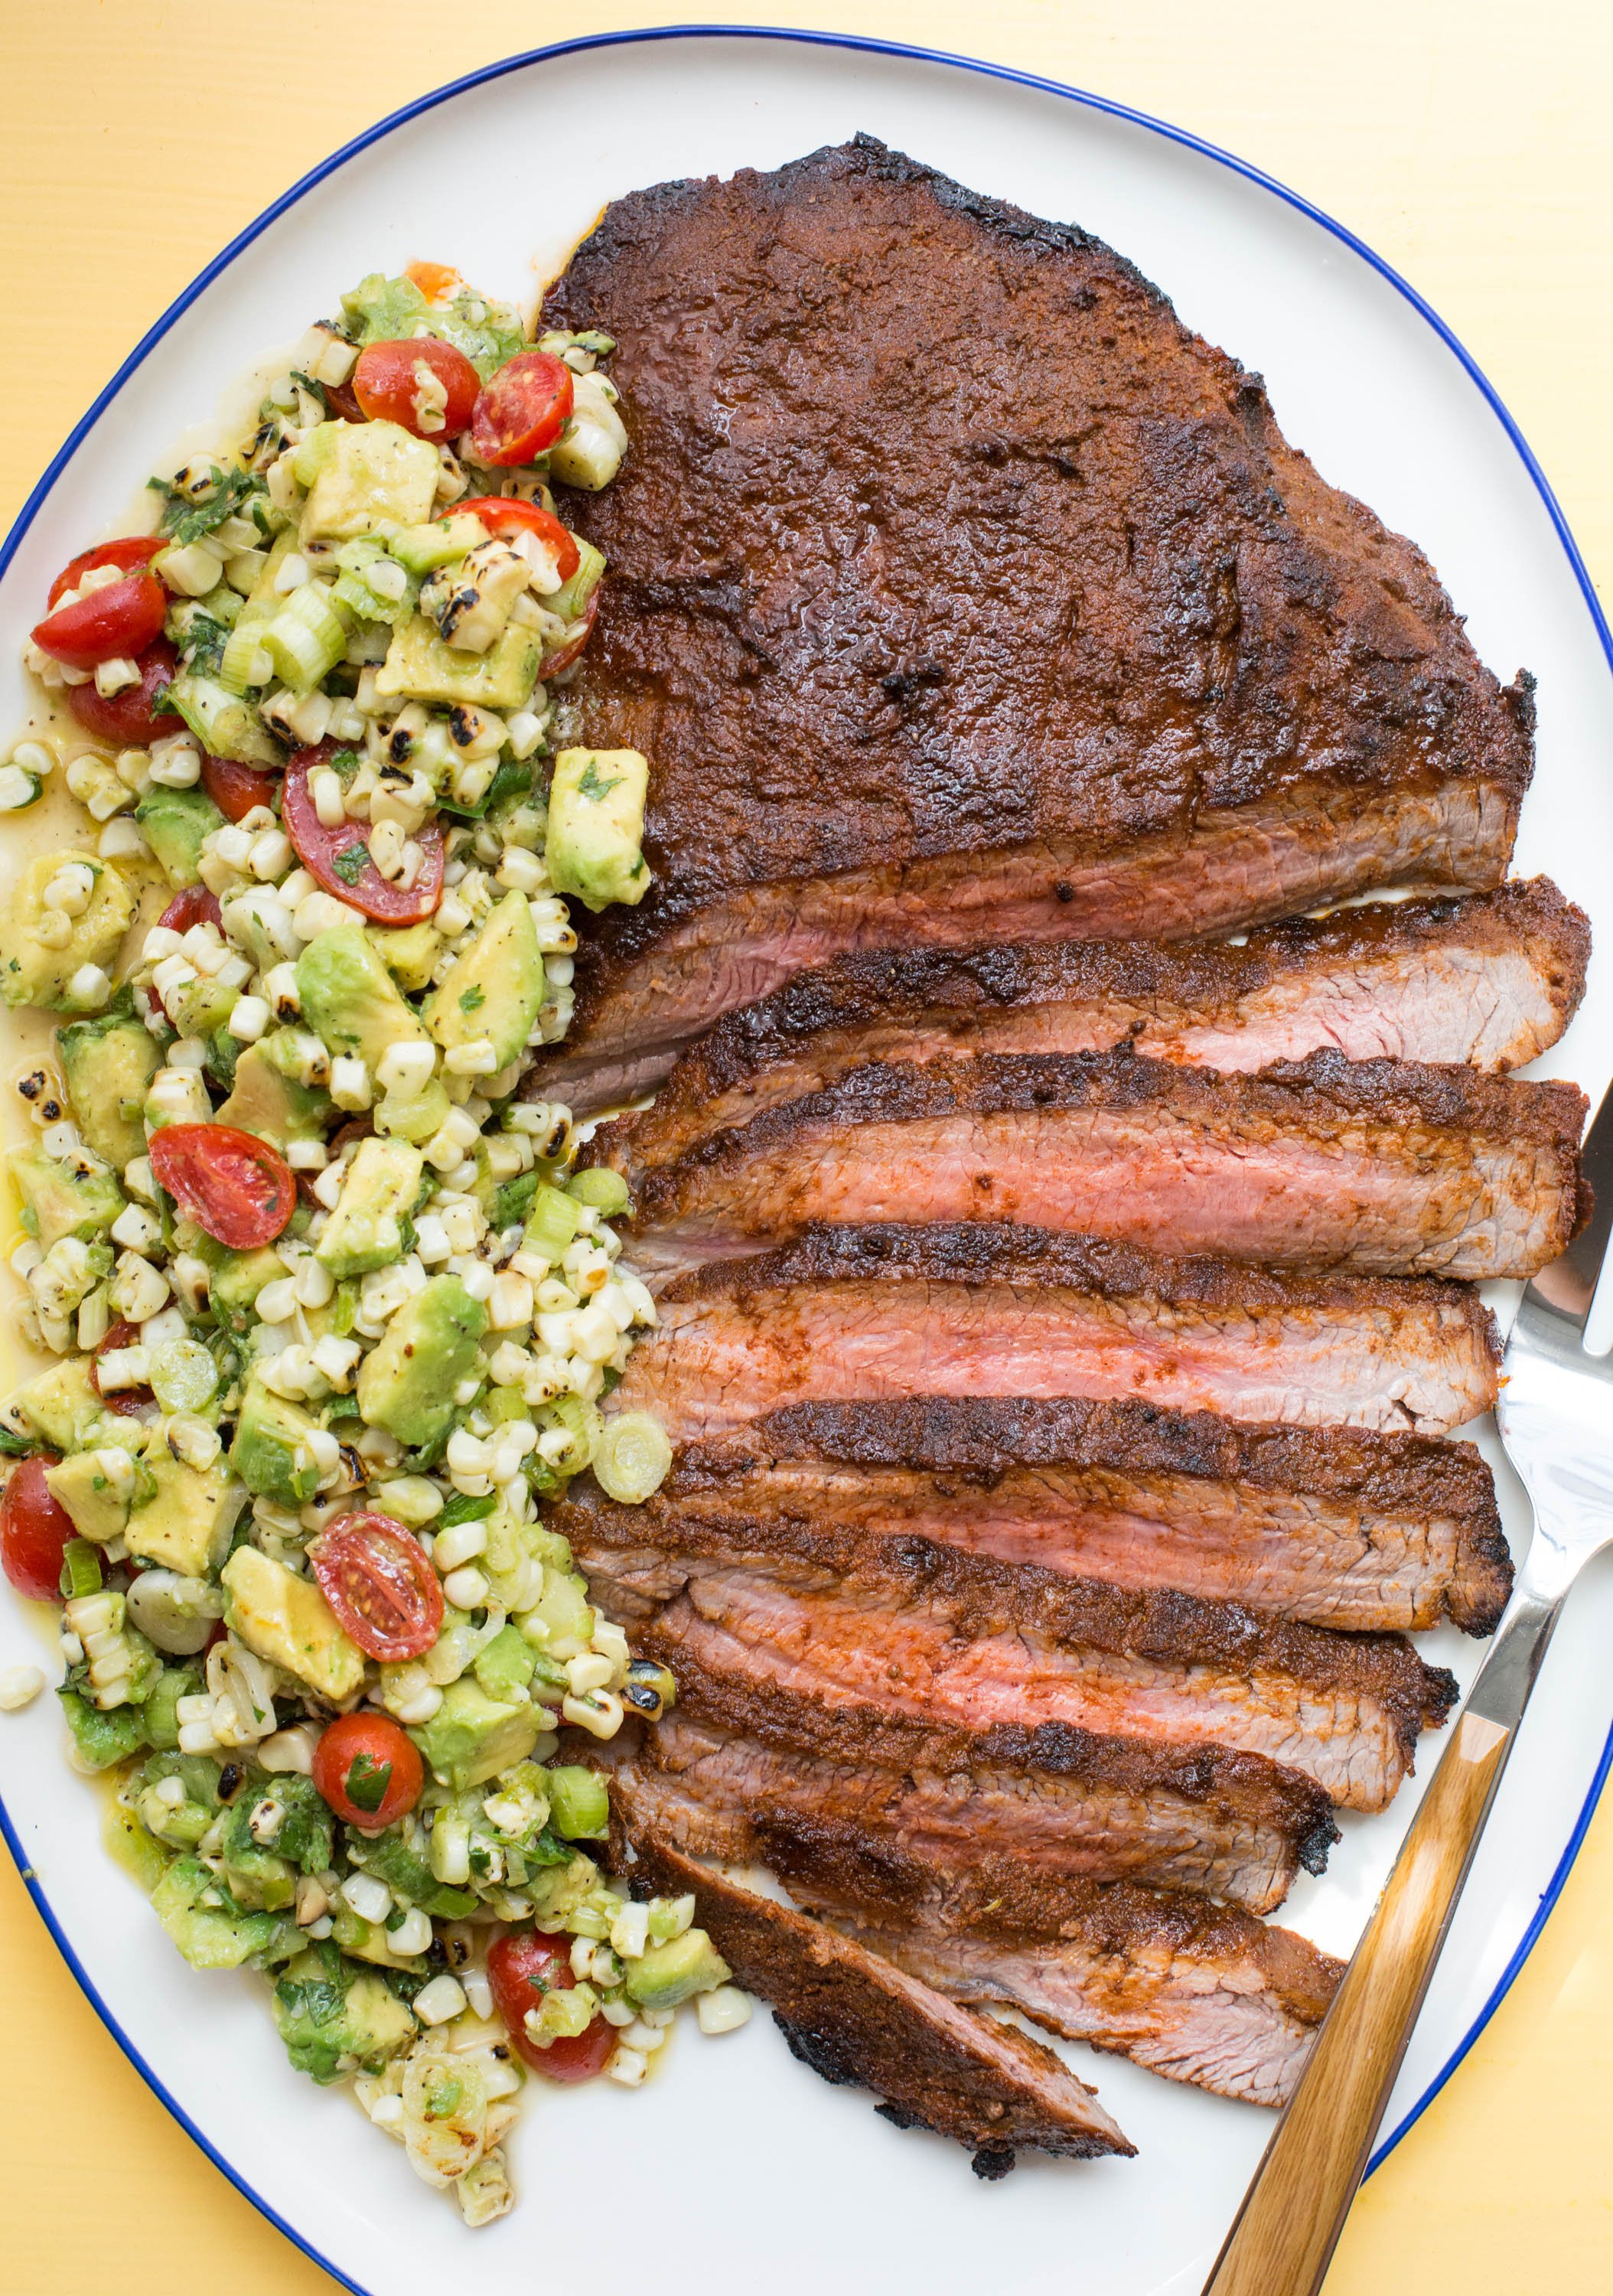 Partially-sliced Chili Rubbed Flank Steak with Corn, Tomato and Avocado Salad.